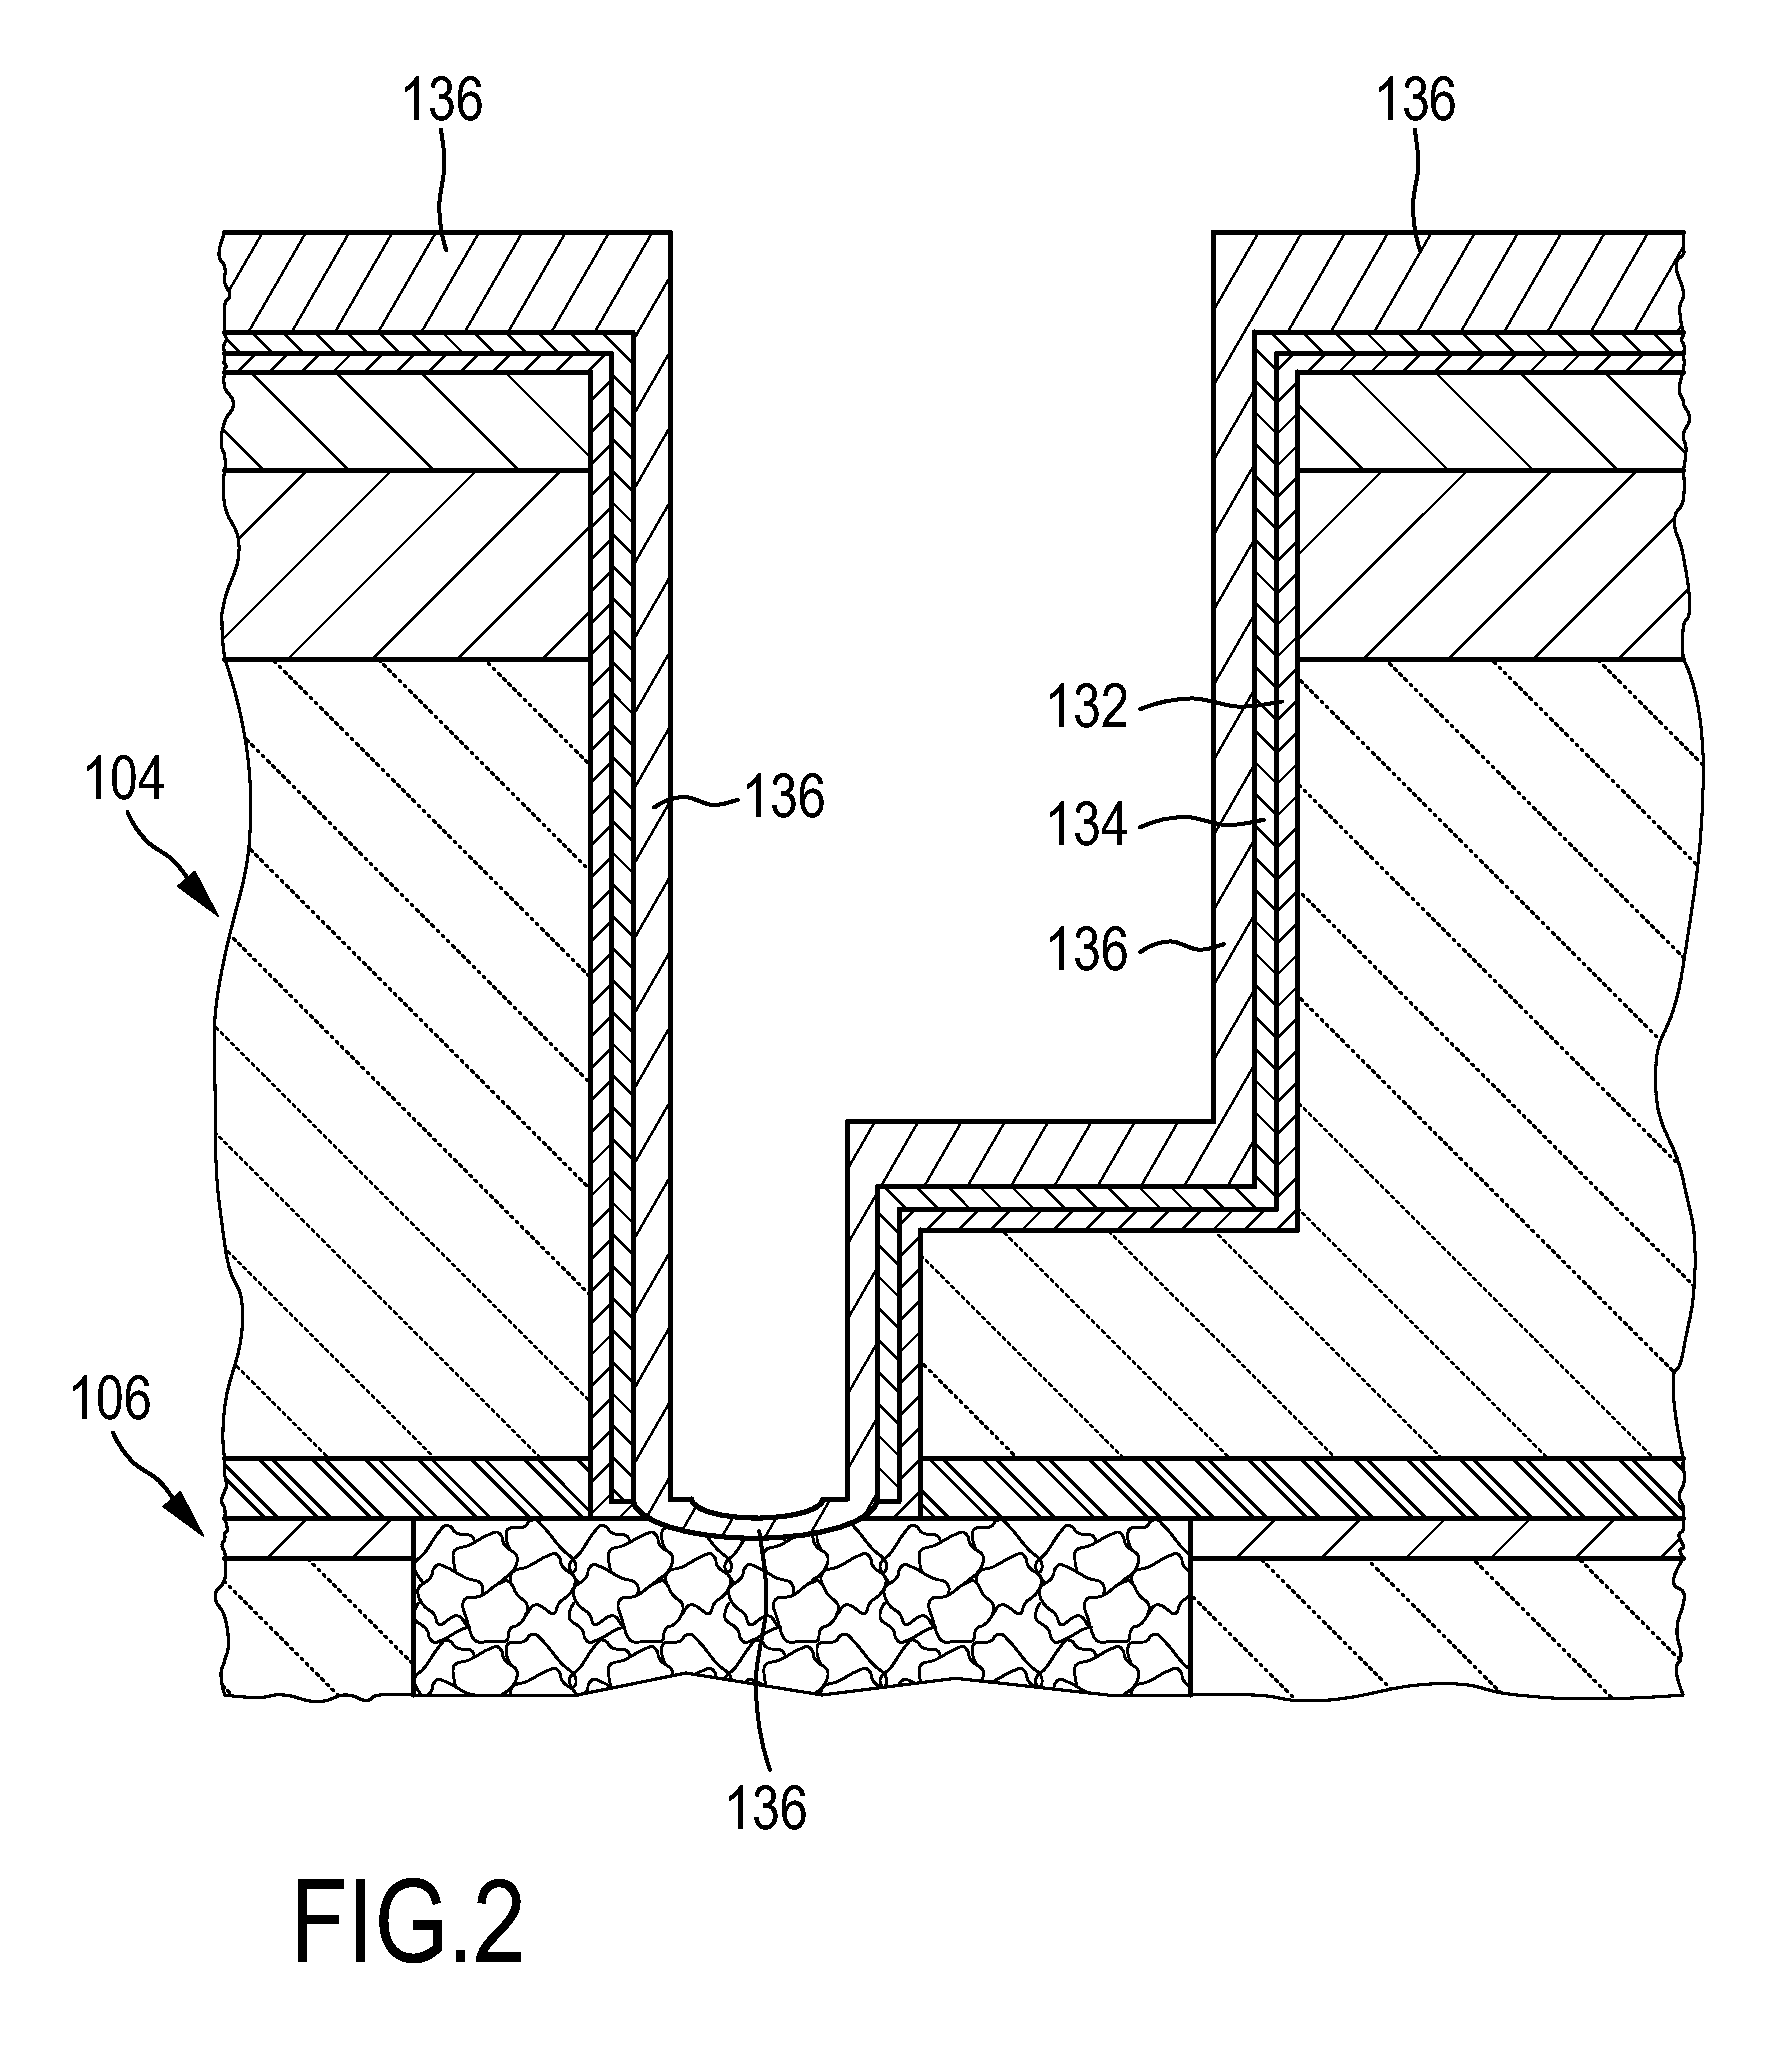 CuSiN/SiN DIFFUSION BARRIER FOR COPPER IN INTEGRATED-CIRCUIT DEVICES